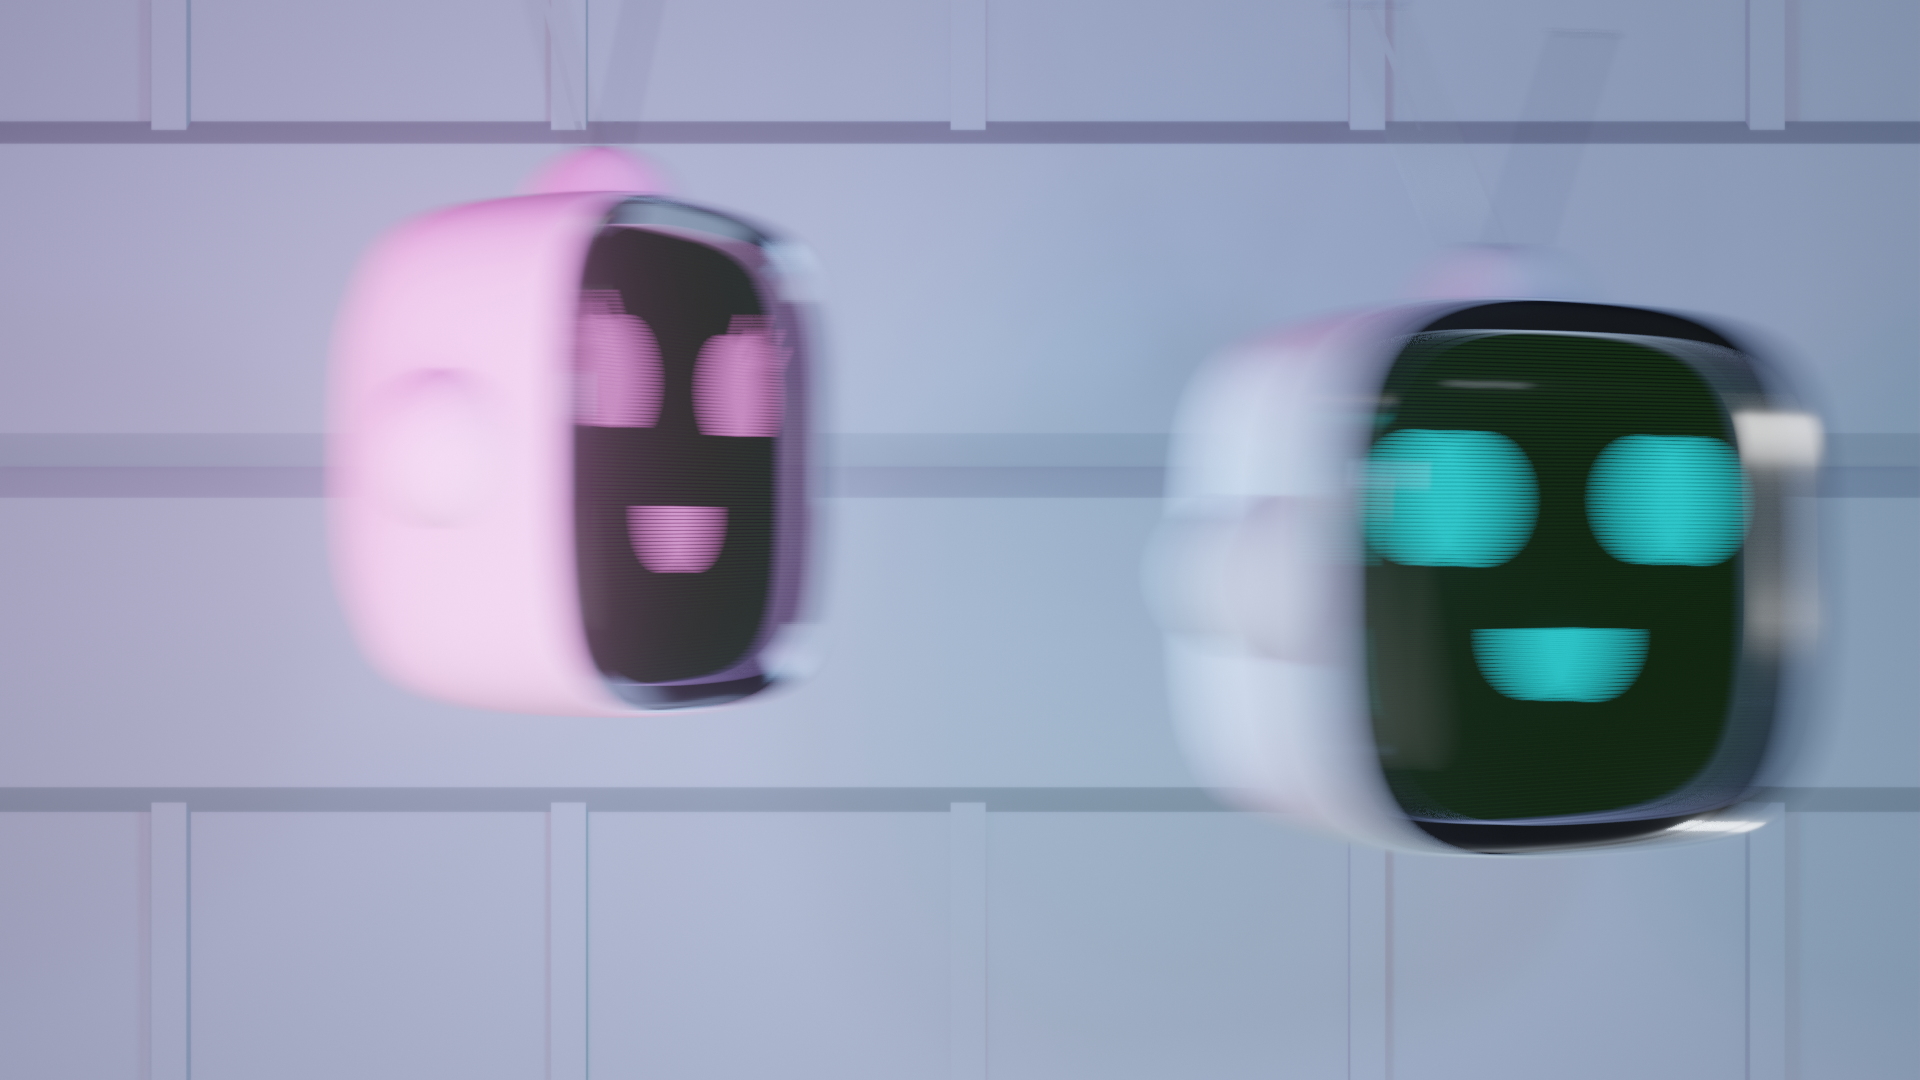 2 small robots preview image 3